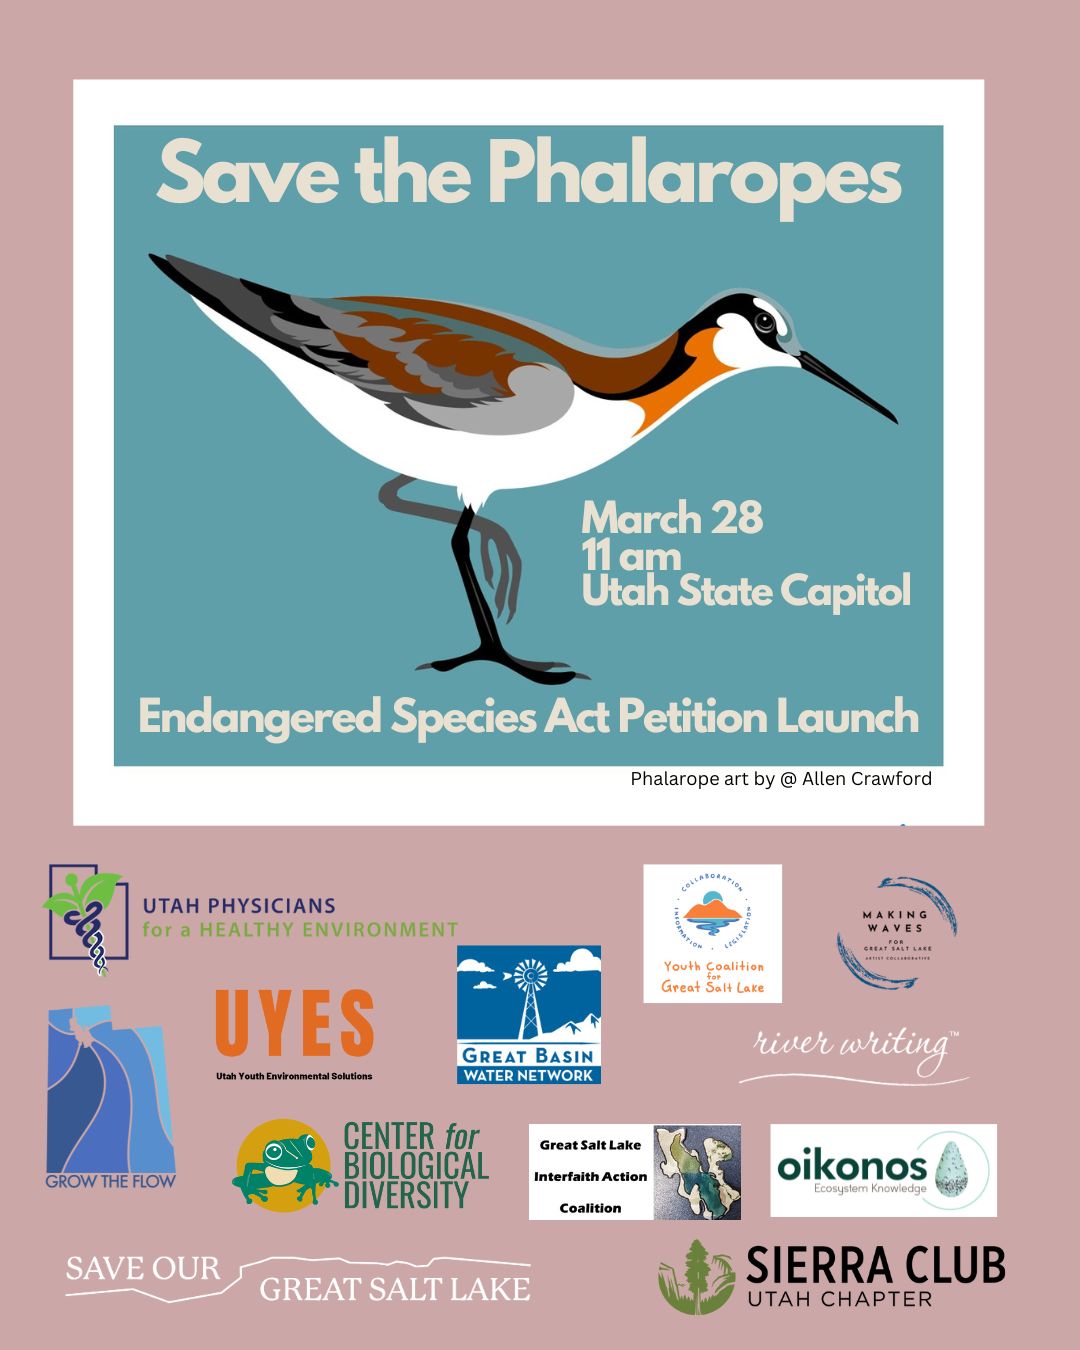 Save the Phalaropes event at the Utah State Capitol. March 28th at 11 AM.